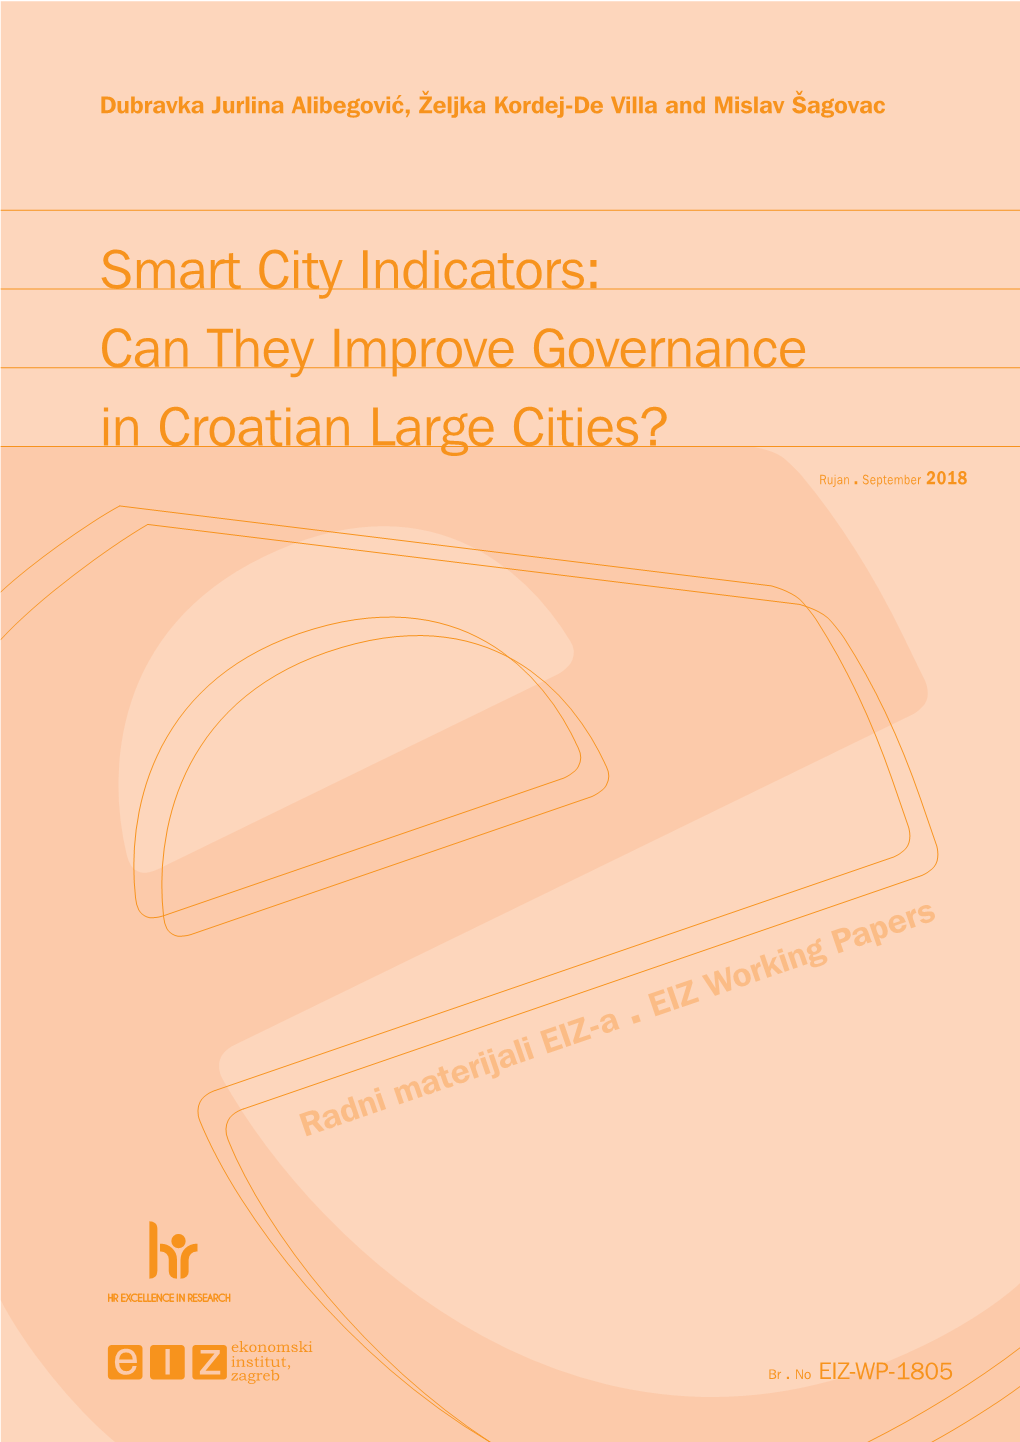 Smart City Indicators: Can They Improve Governance in Croatian Large Cities?